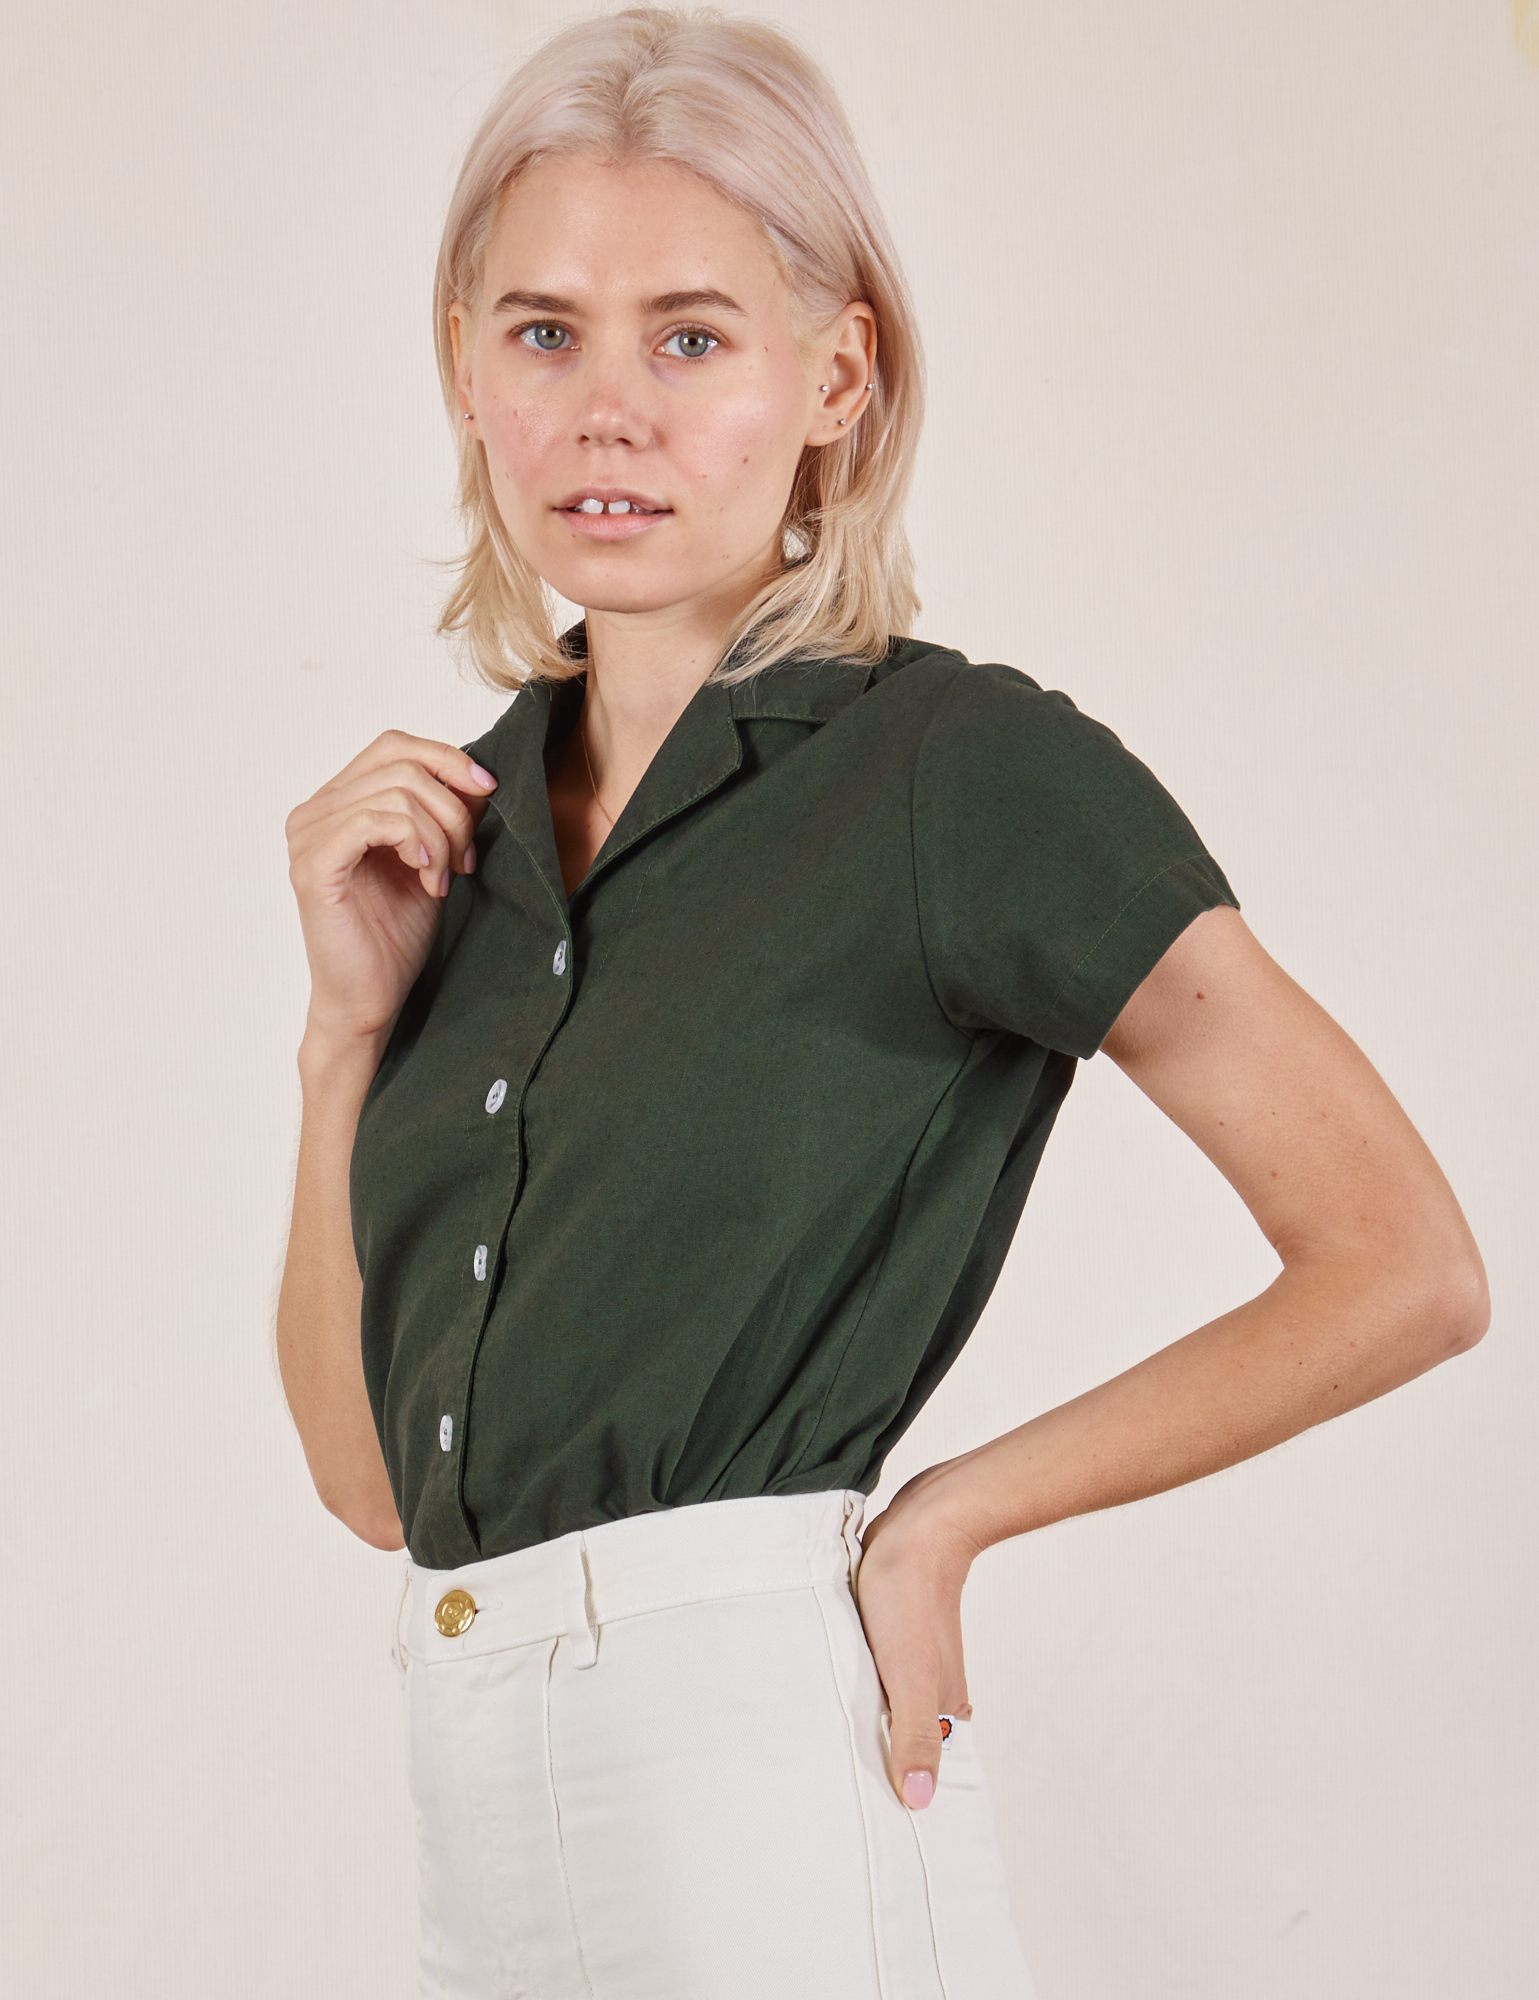 Pantry Button-Up in Swamp Green side view on Madeline